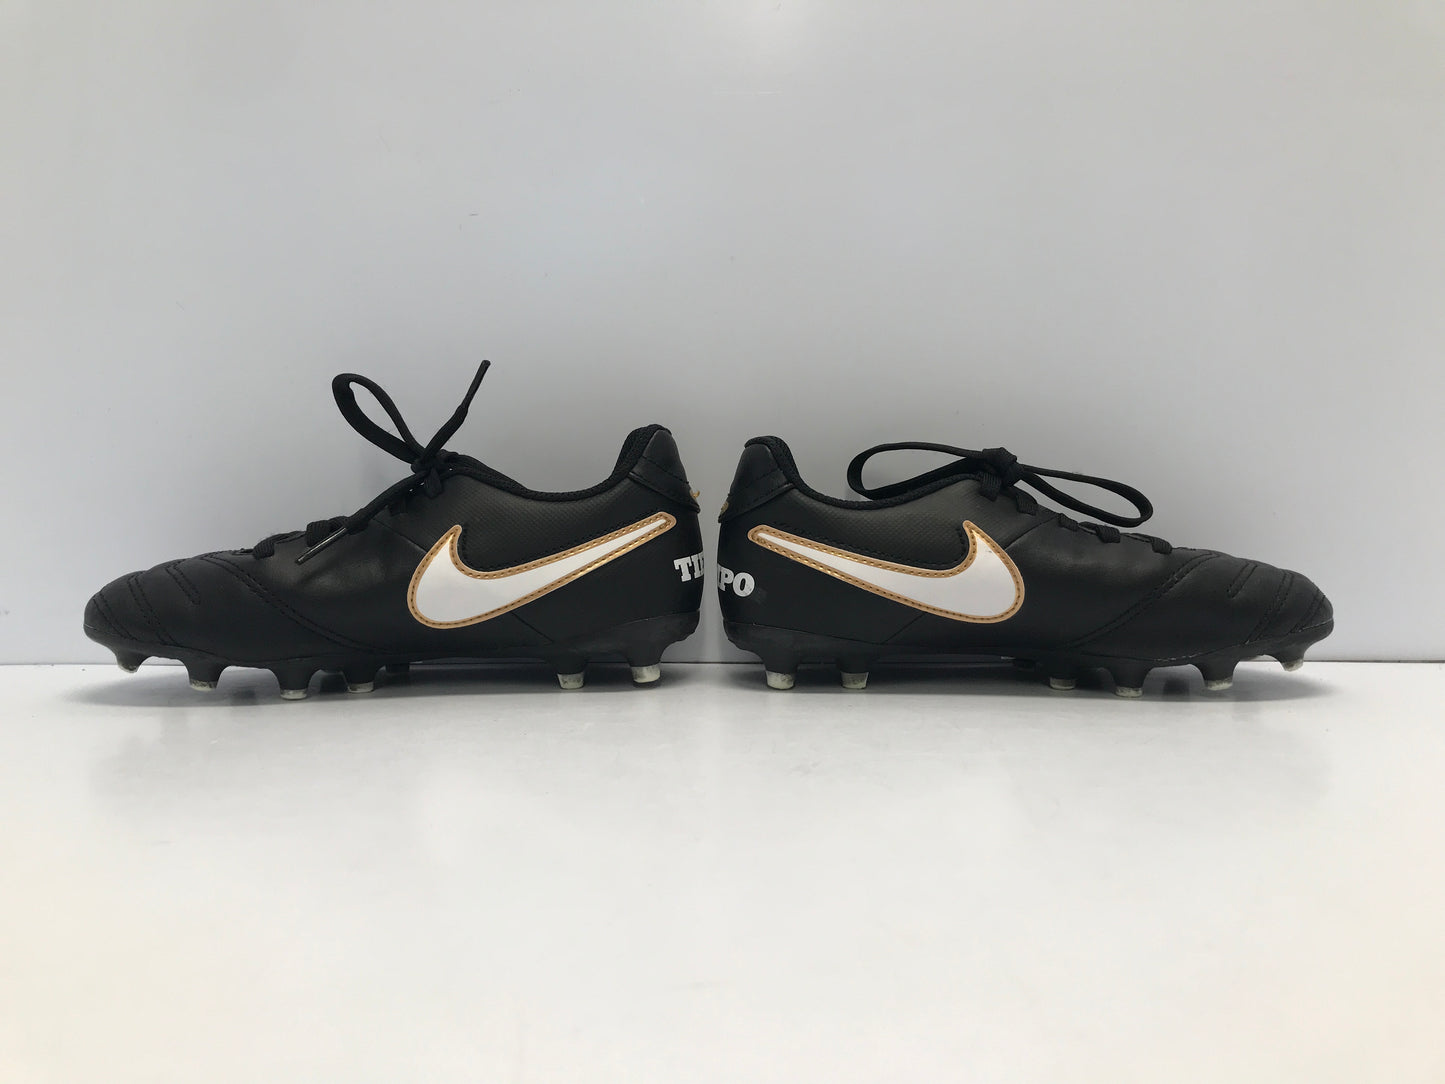 Soccer Shoes Cleats Child Size 1 Nike Tiempo Black White Gold Outstanding Quality